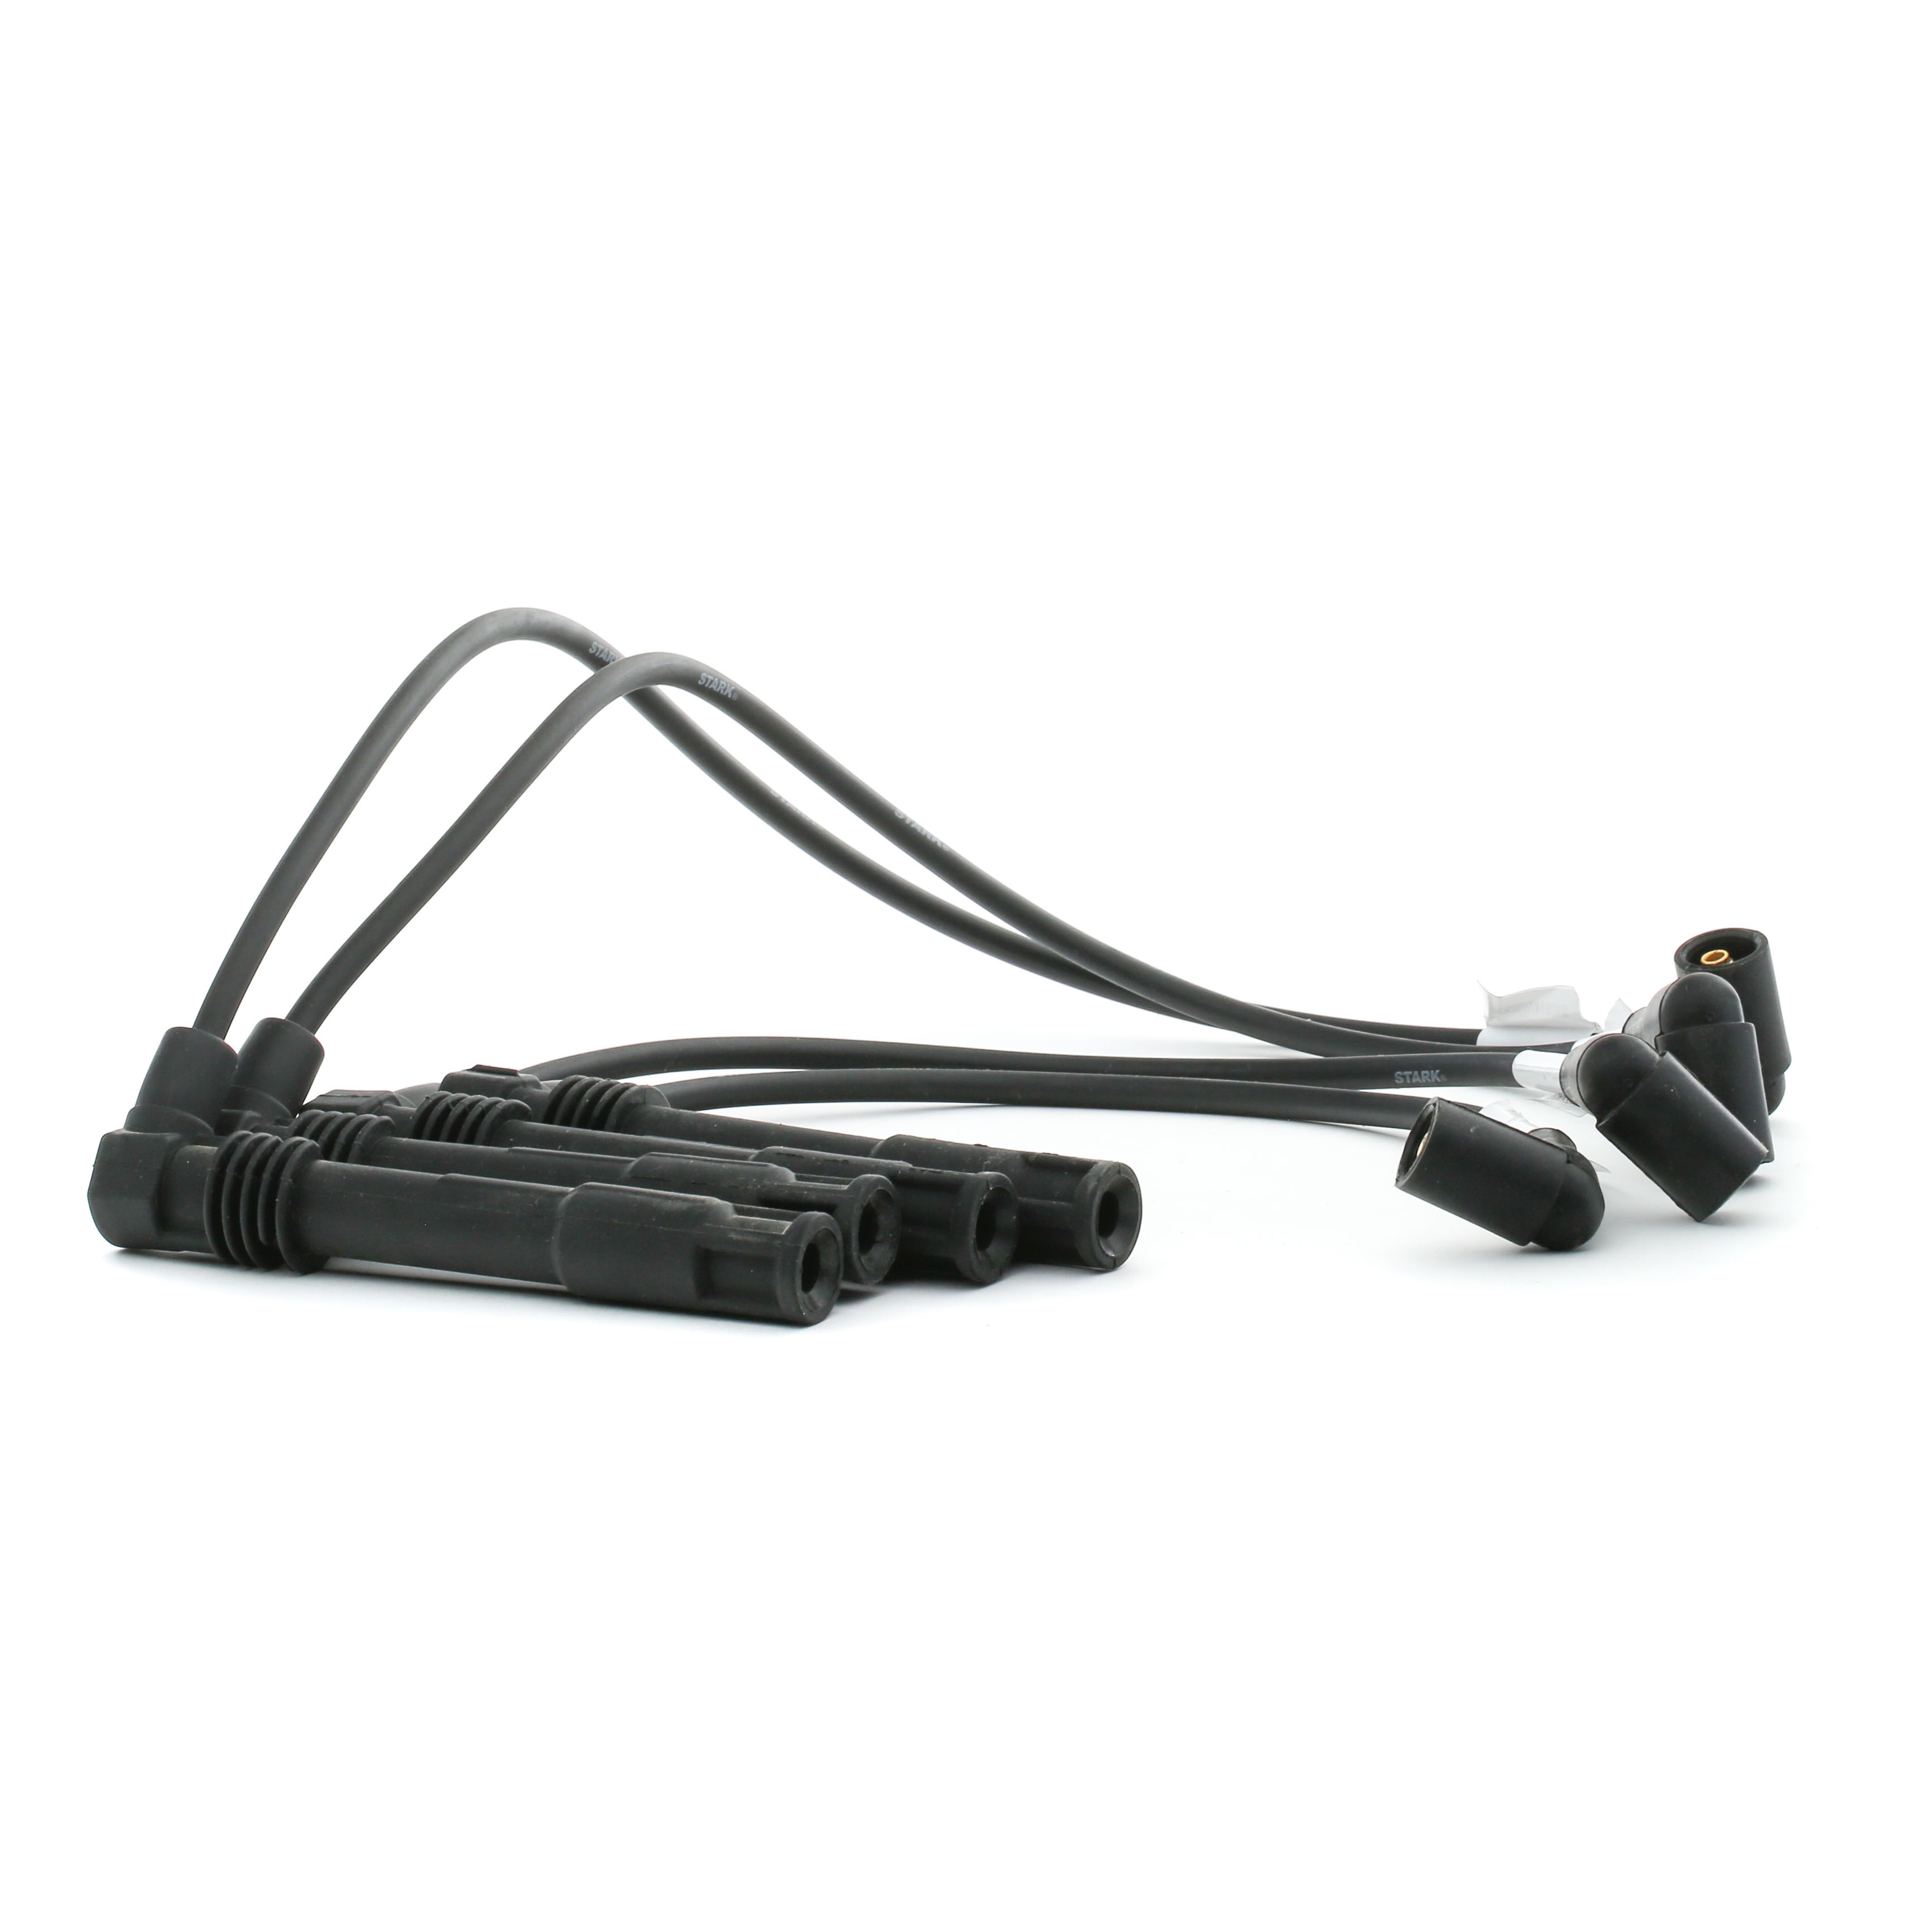 Skoda Ignition Cable Kit STARK SKIC-0030047 at a good price